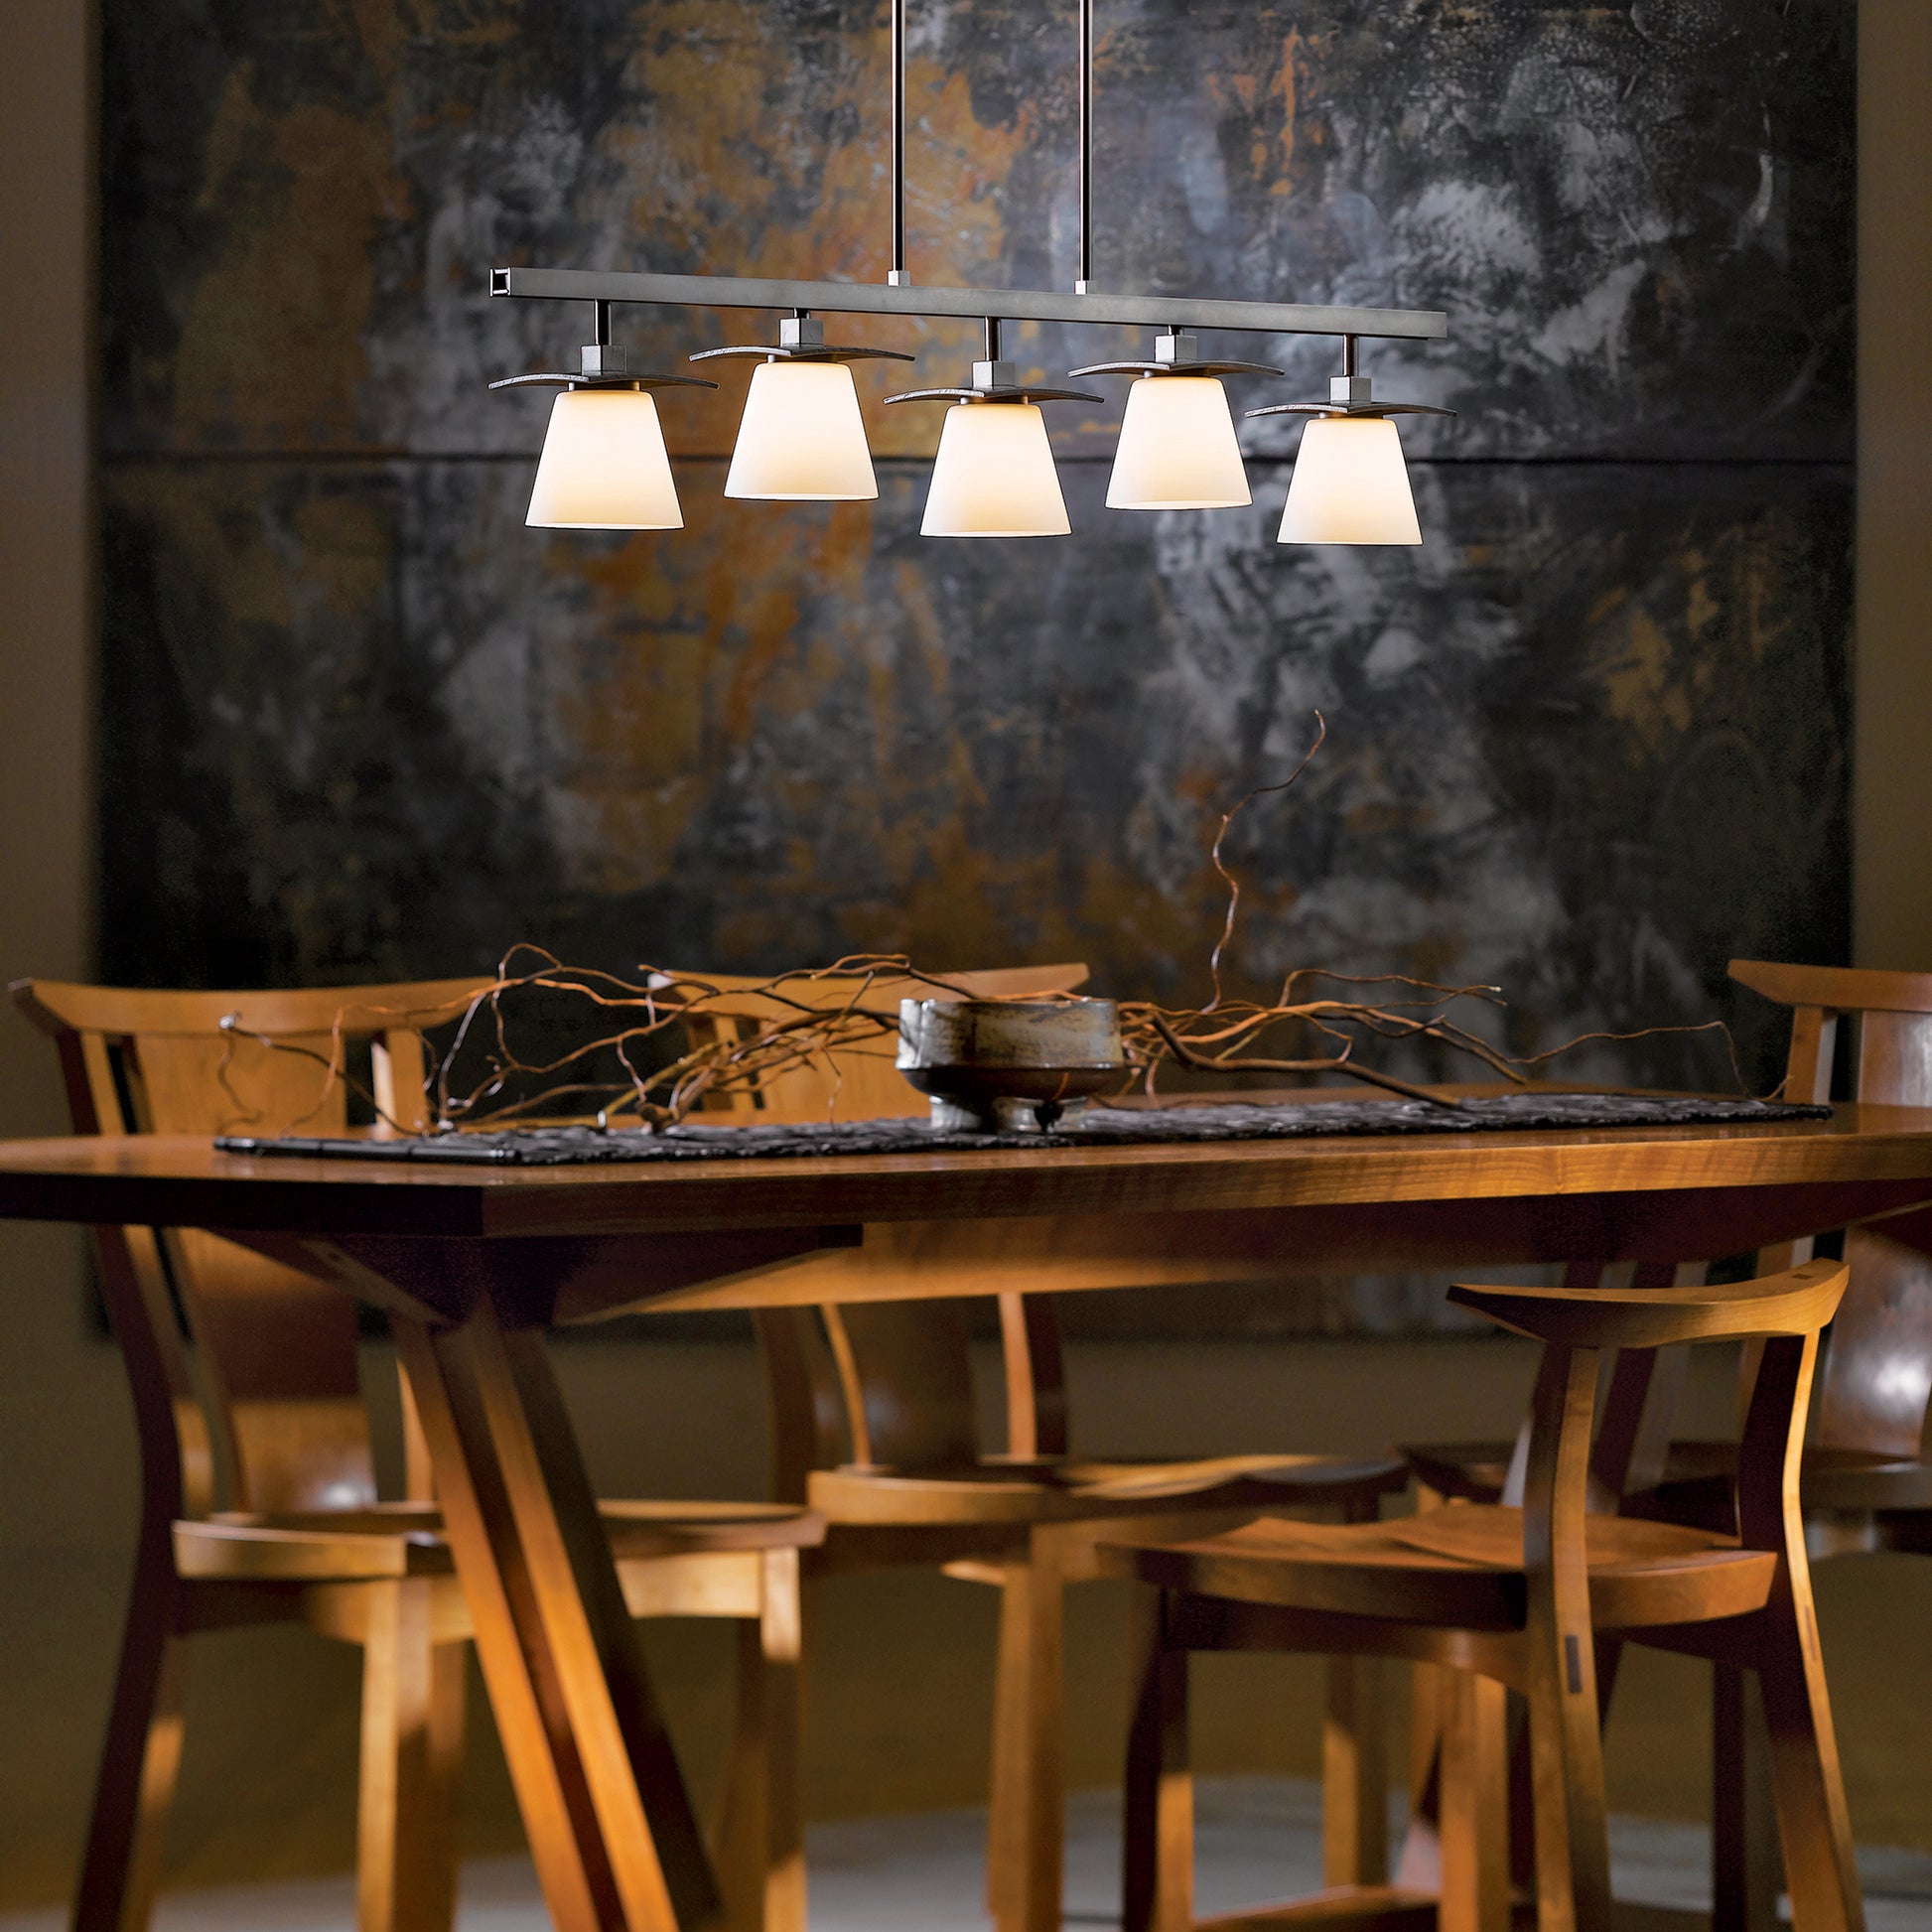 Enhance your dining experience with the exquisite Hubbardton Forge Wren 5-Light Pendant, handcrafted in Vermont by renowned artisans at Hubbardton Forge lighting. This stunning piece will elevate your dining room ambiance.